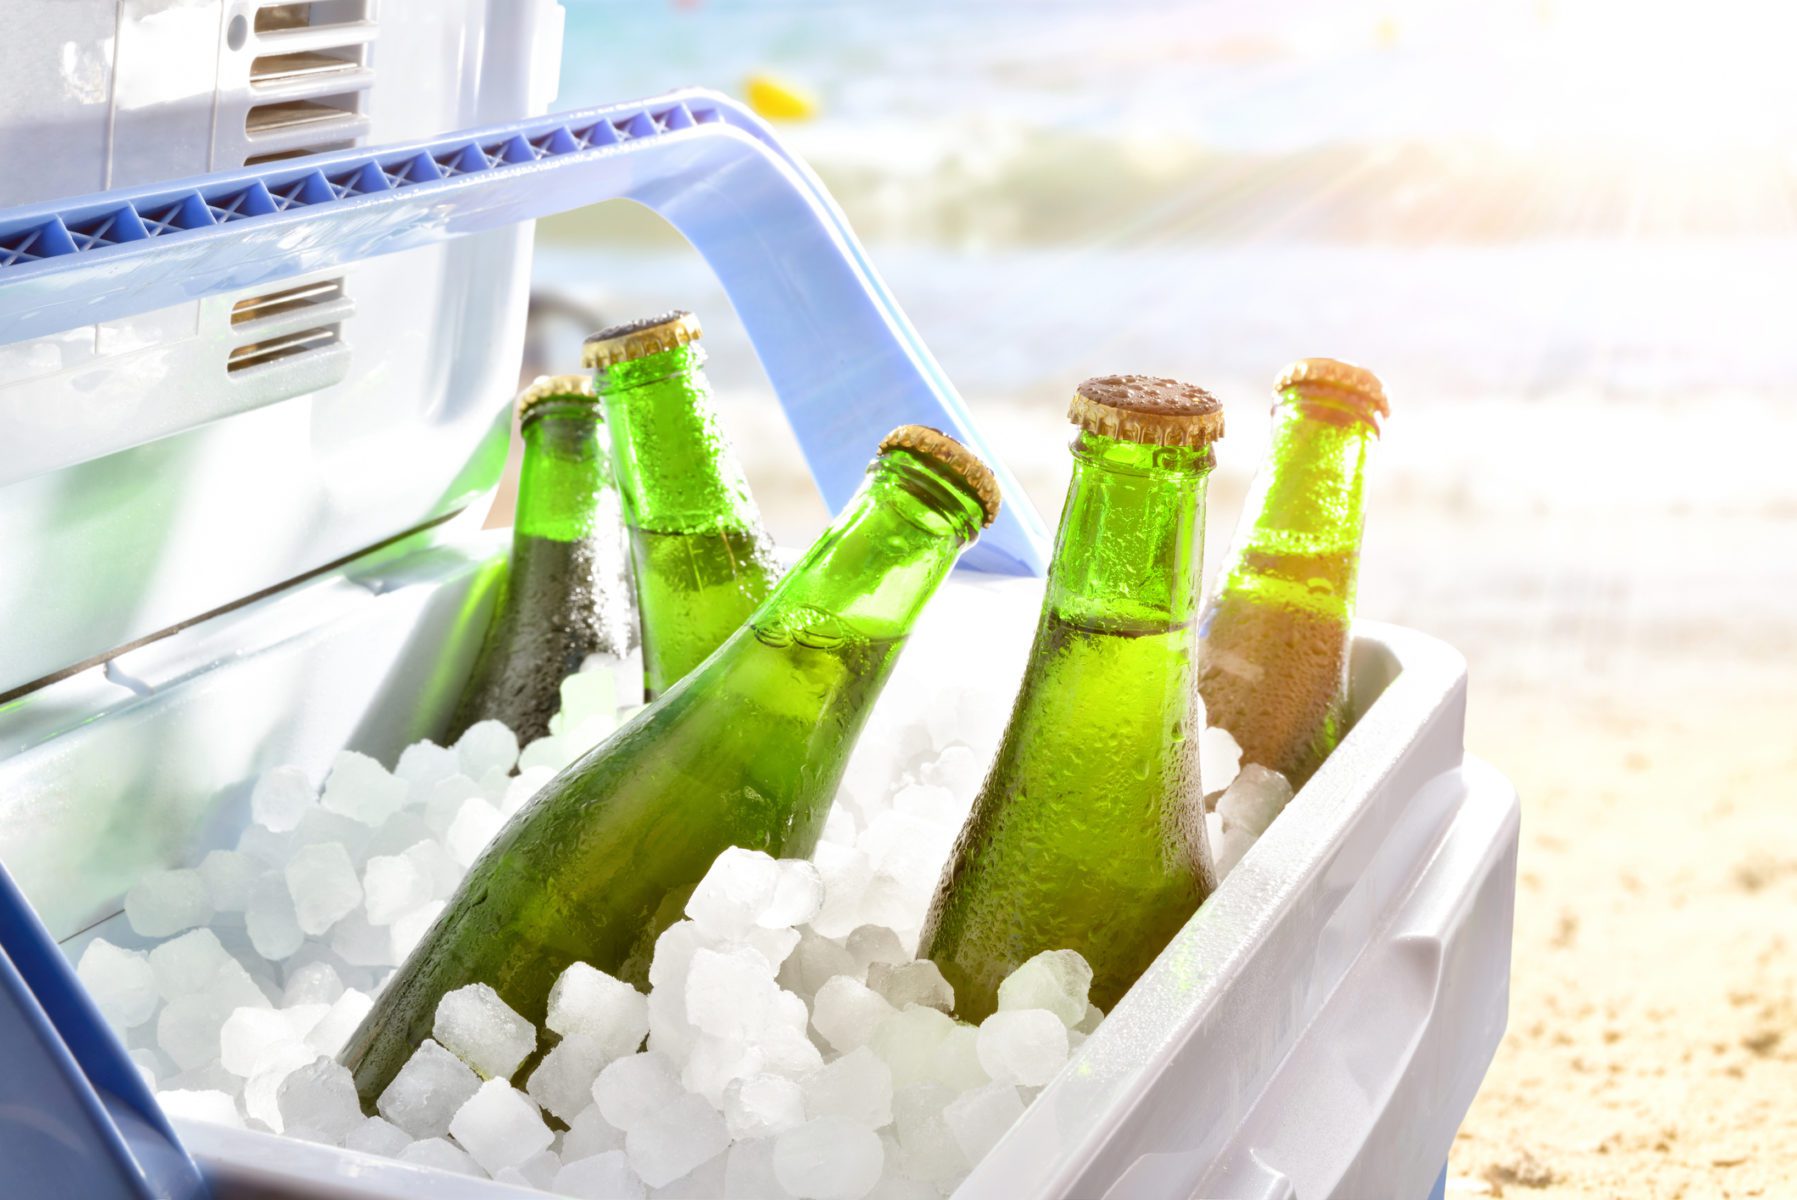 Beer chilled on ice in cooler on the beach